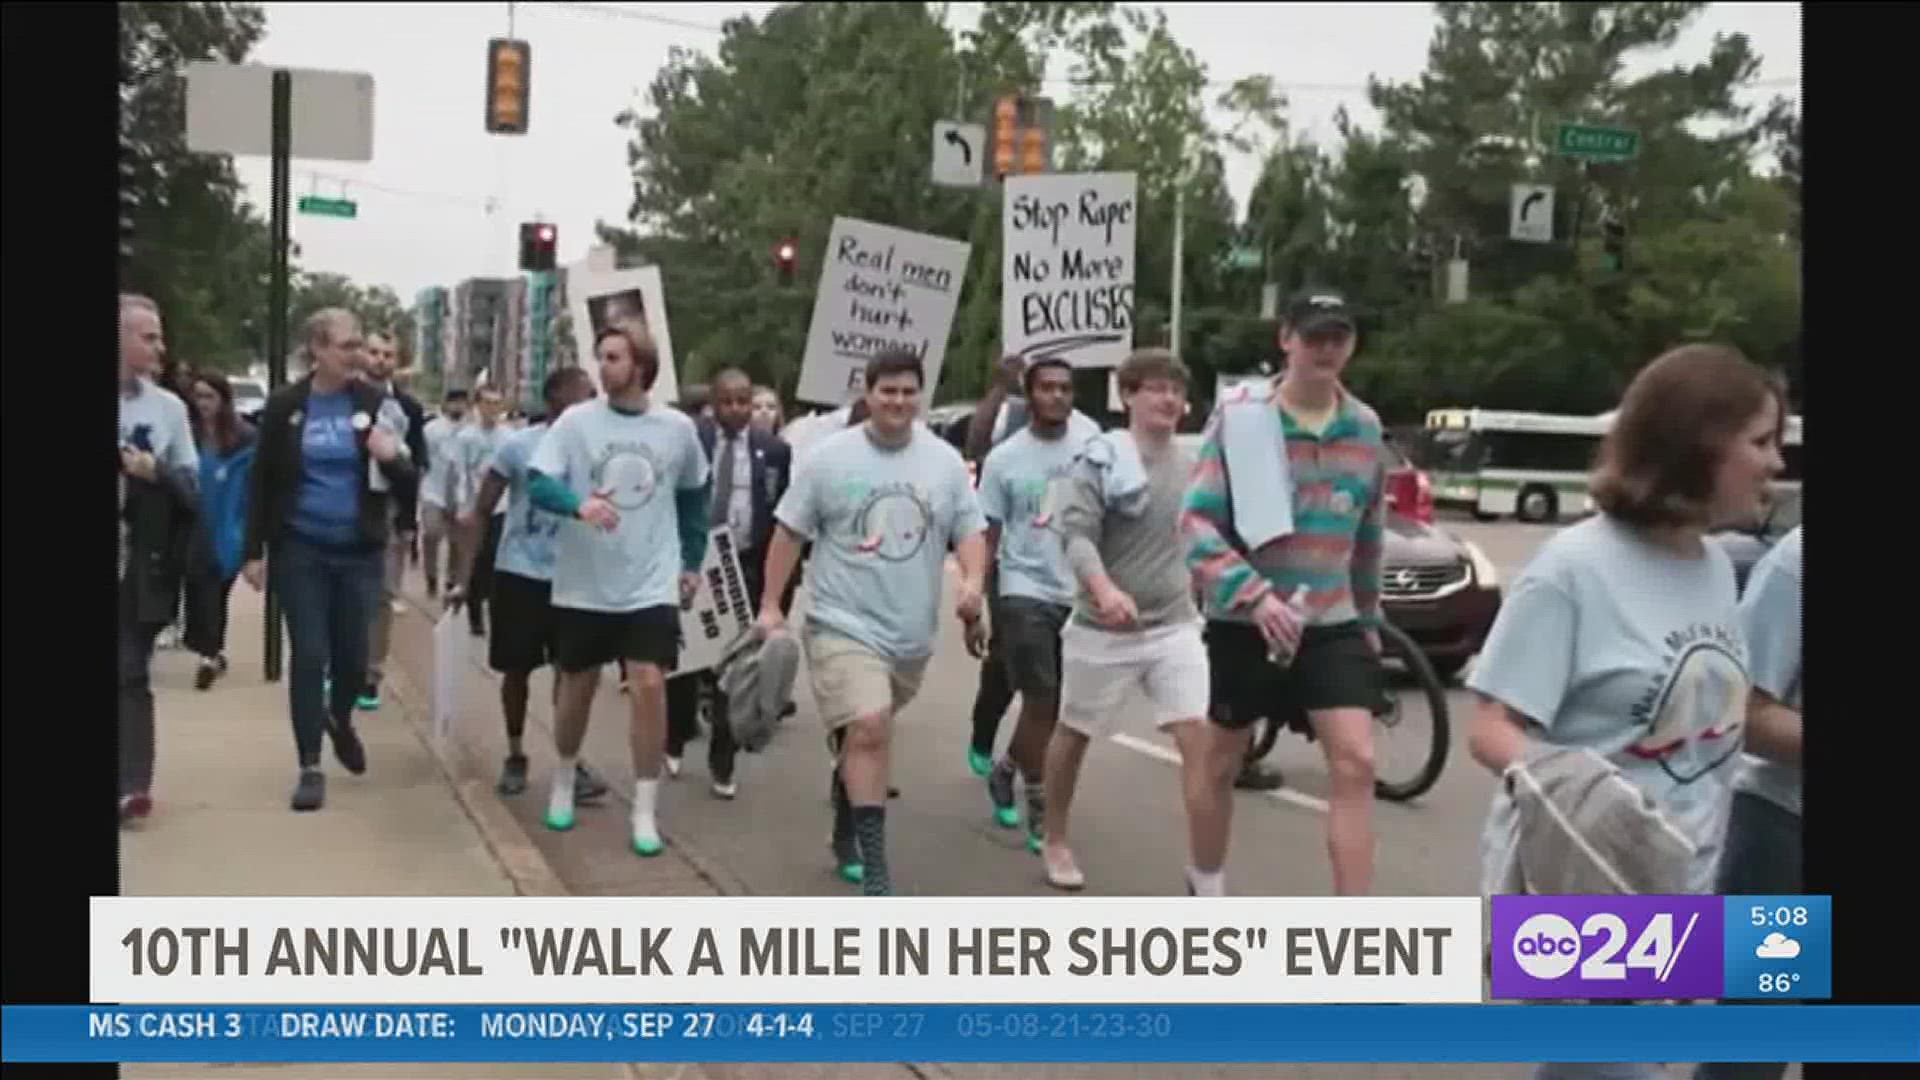 Men will slip into a pair of high heels and walk mile in support of ending violence against women.